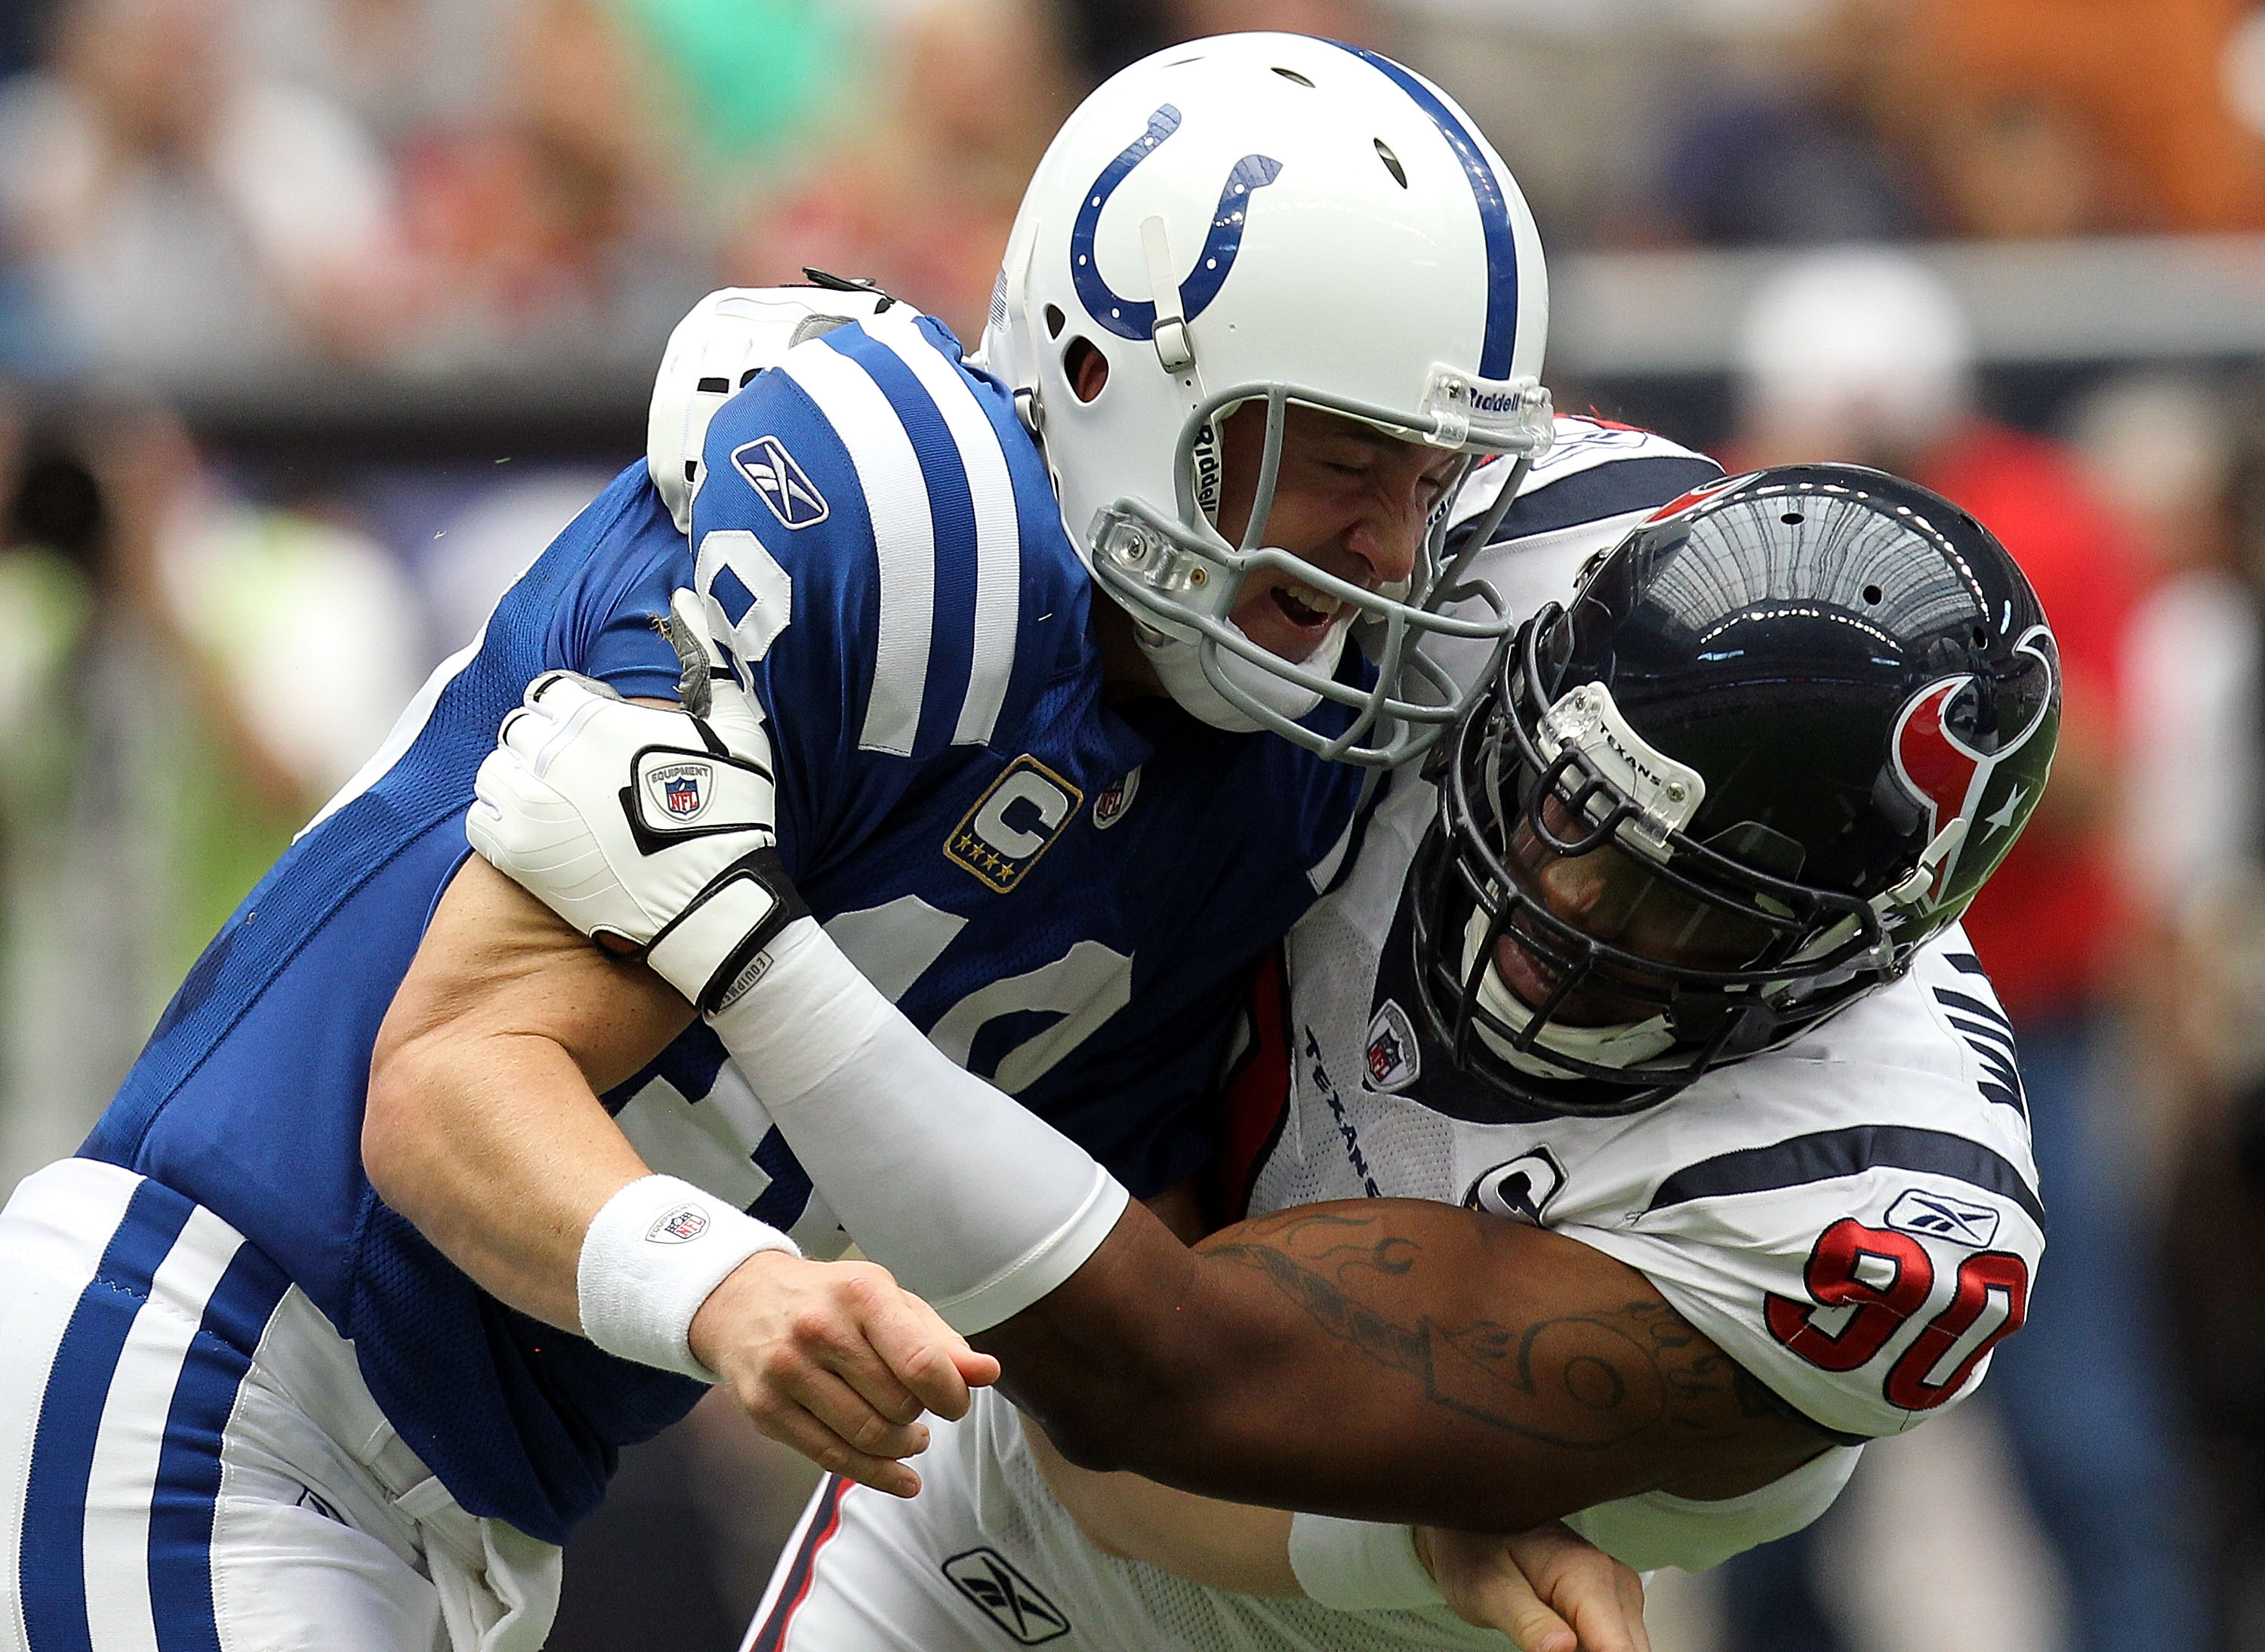 HOUSTON - SEPTEMBER 12:  Quarterback Peyton Manning #18 of the Indianapolis Colts is tackled by Mario Williams #90 of the Houston Texans during the NFL season opener at Reliant Stadium on September 12, 2010 in Houston, Texas.  (Photo by Ronald Martinez/Ge